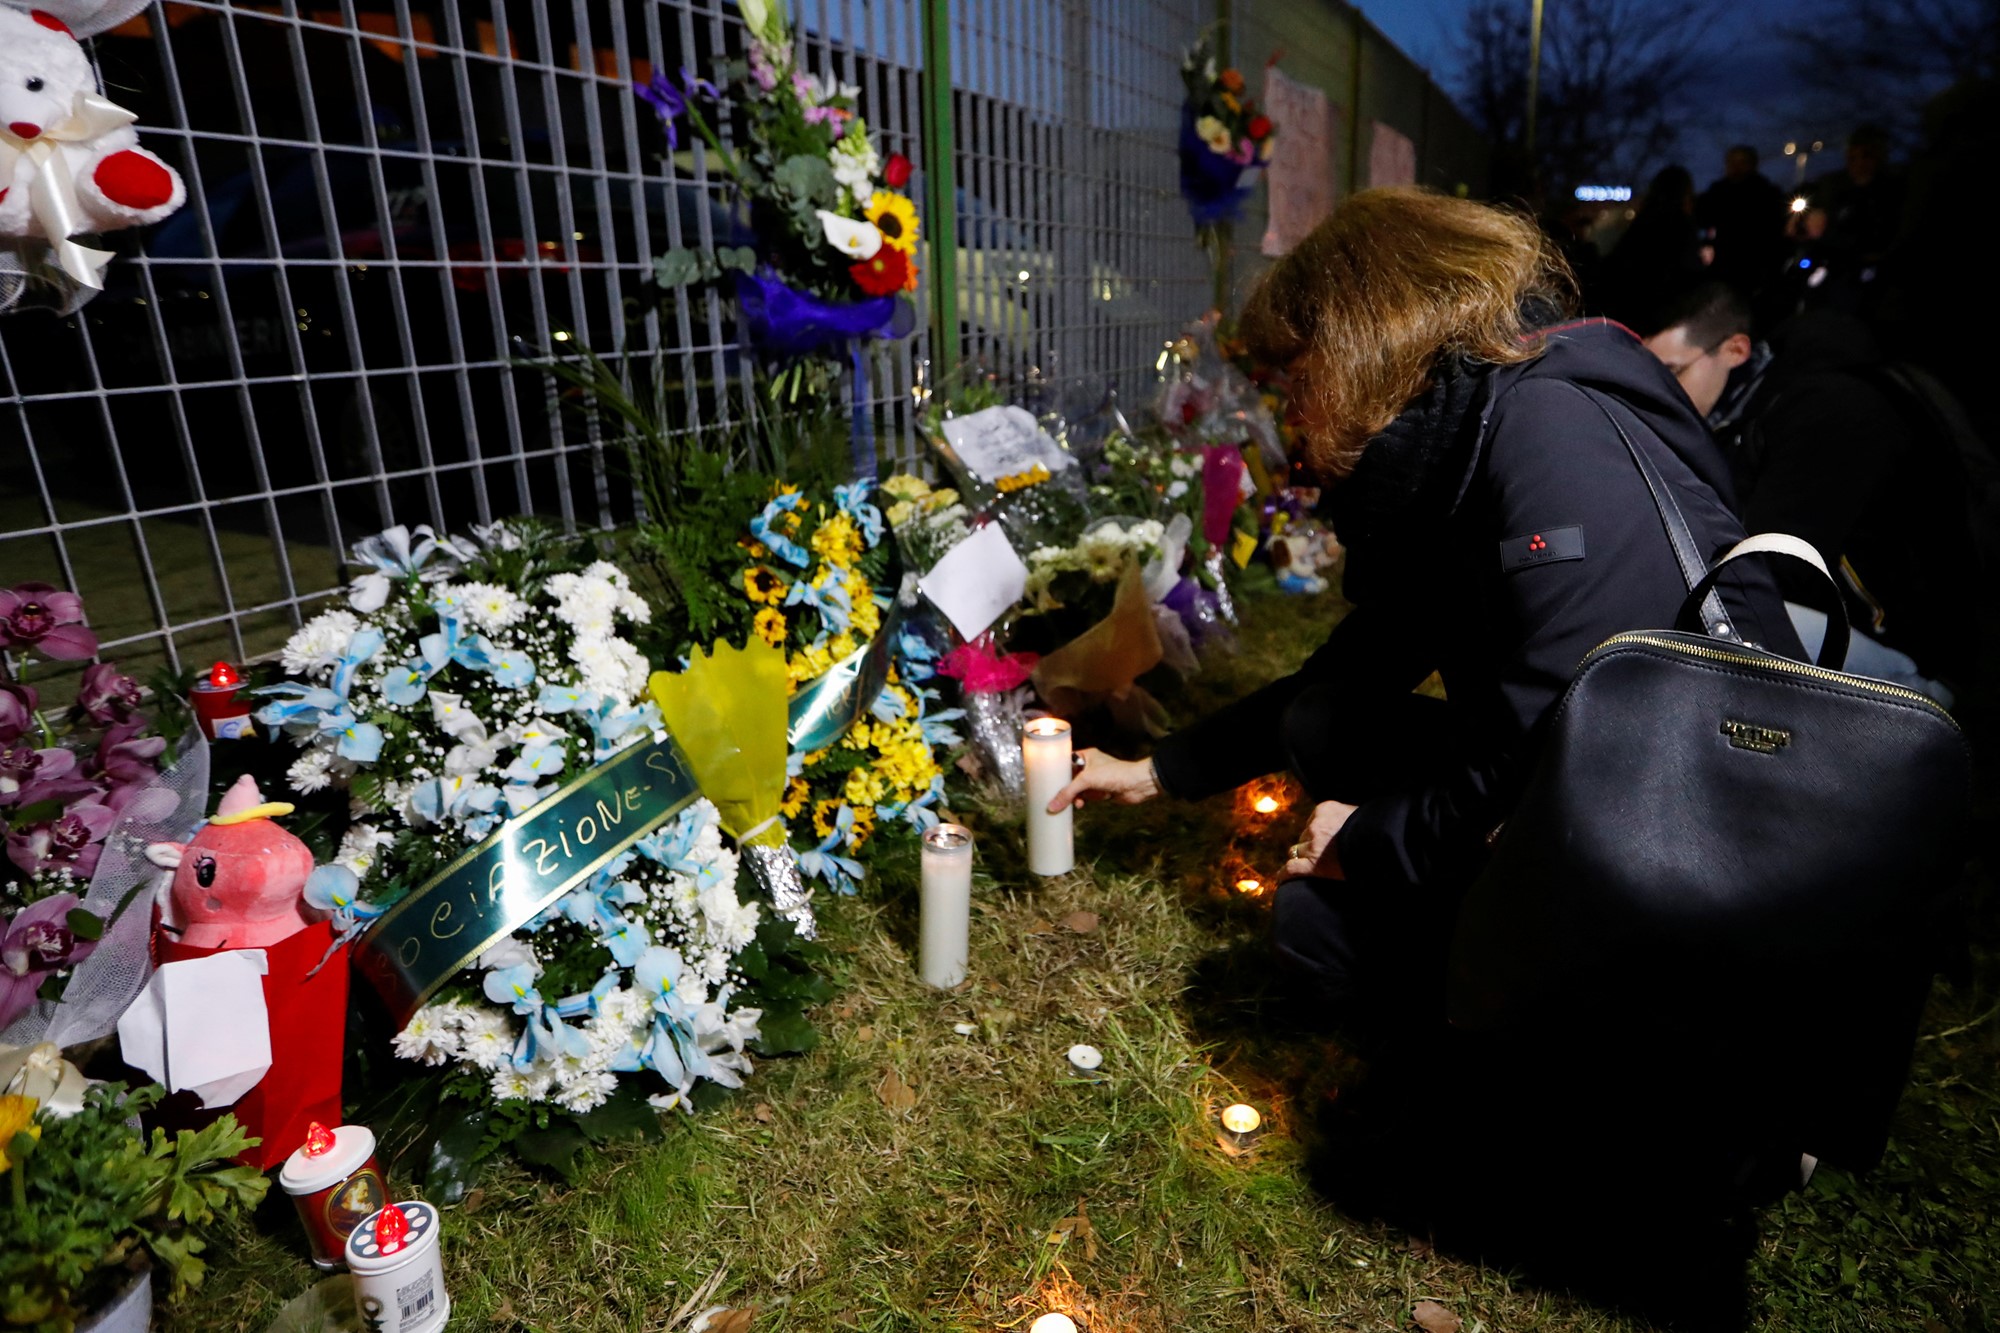 Awoman kneels to place a candle next to a metal fence next to bouquets of flowers and toys. 